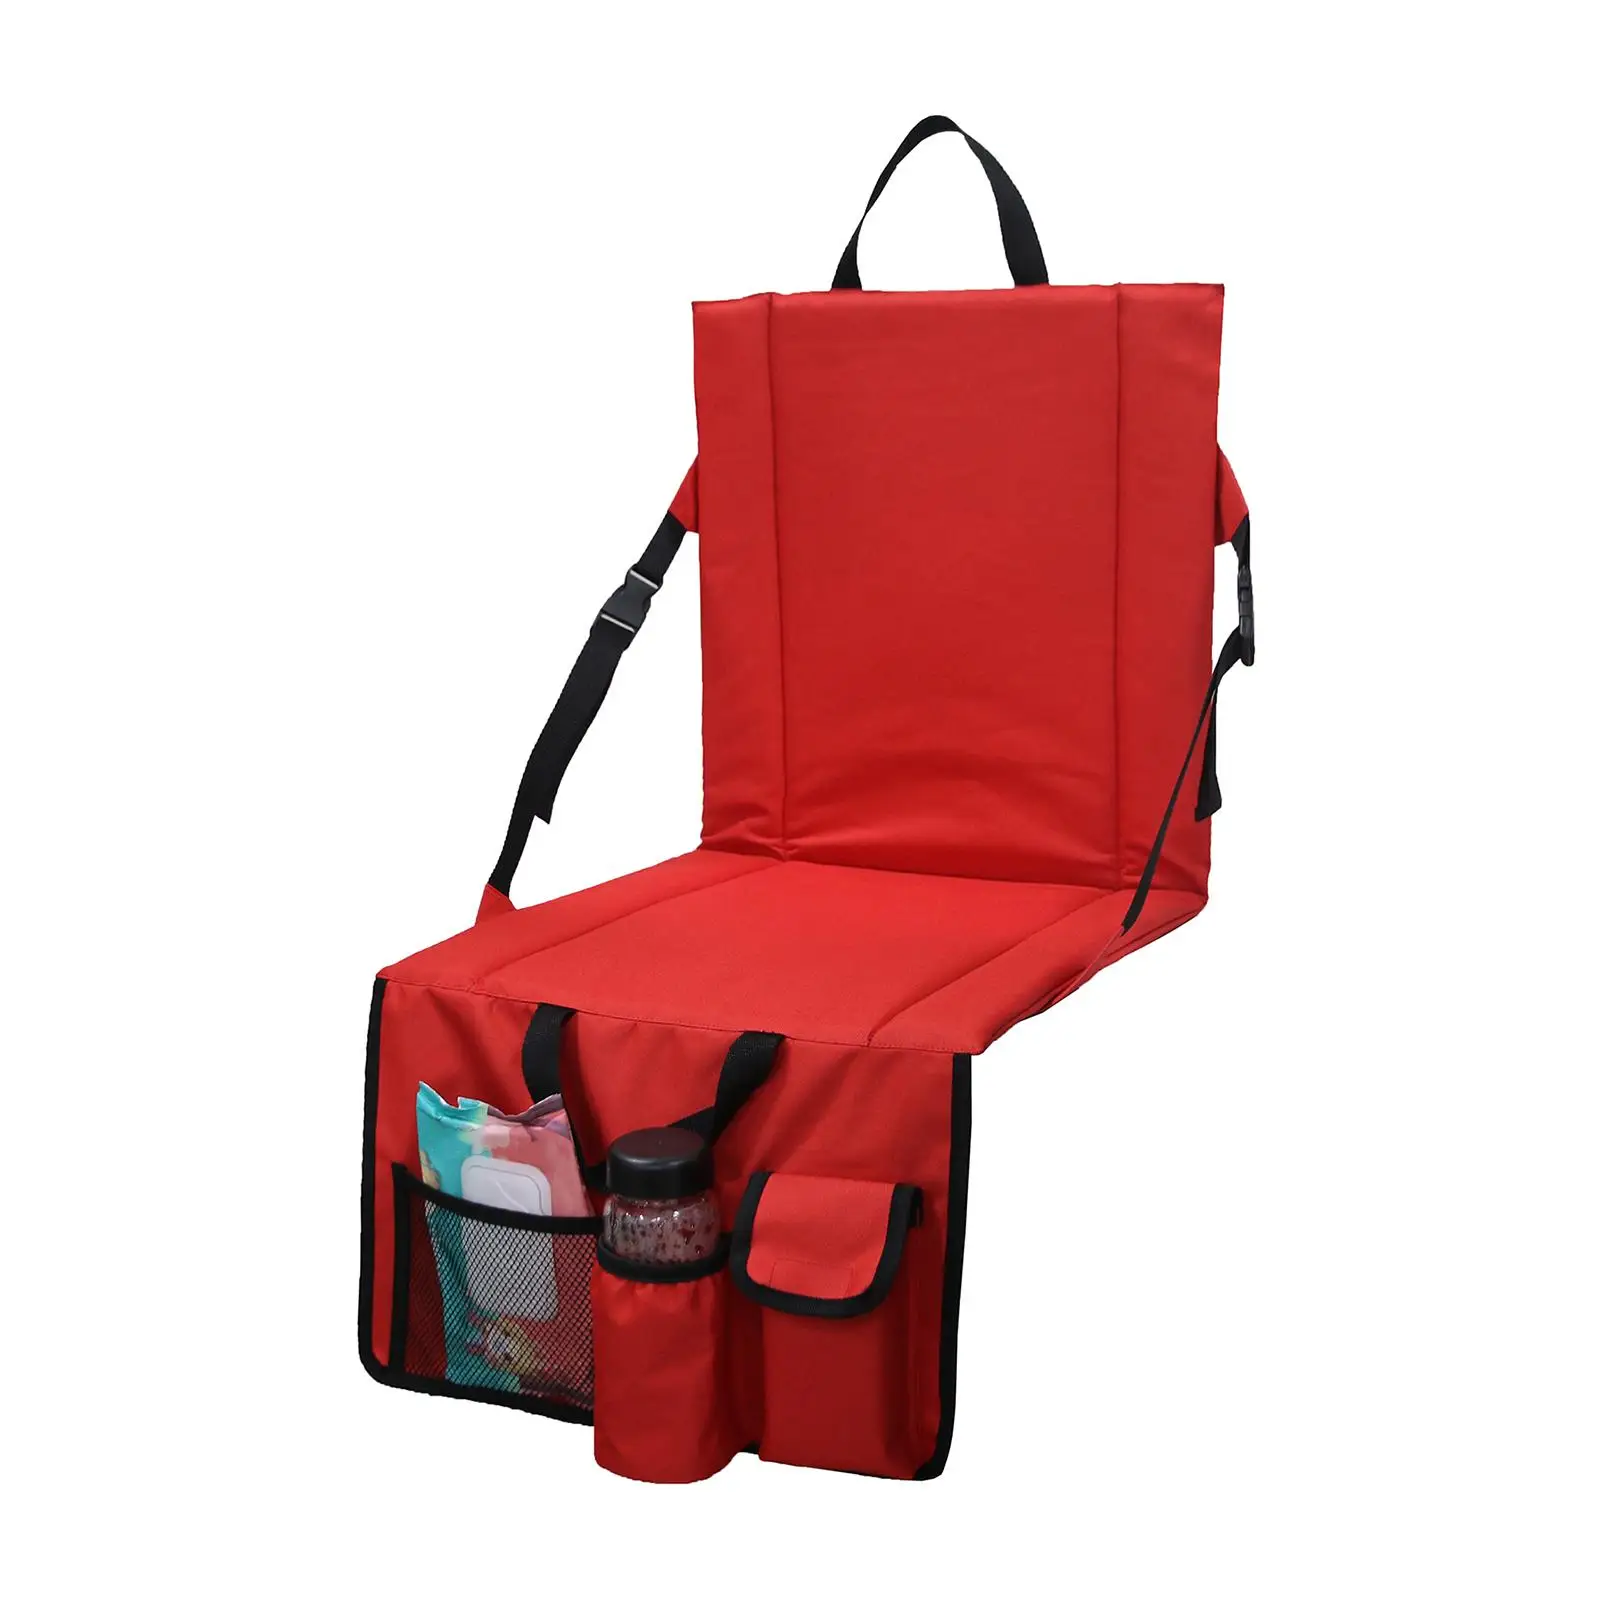 Foldable Stadium Chair with Pocket Padded Cushion Sit Mat Wide Lightweight Oxford Cloth Camping Trekking Outdoor Travel